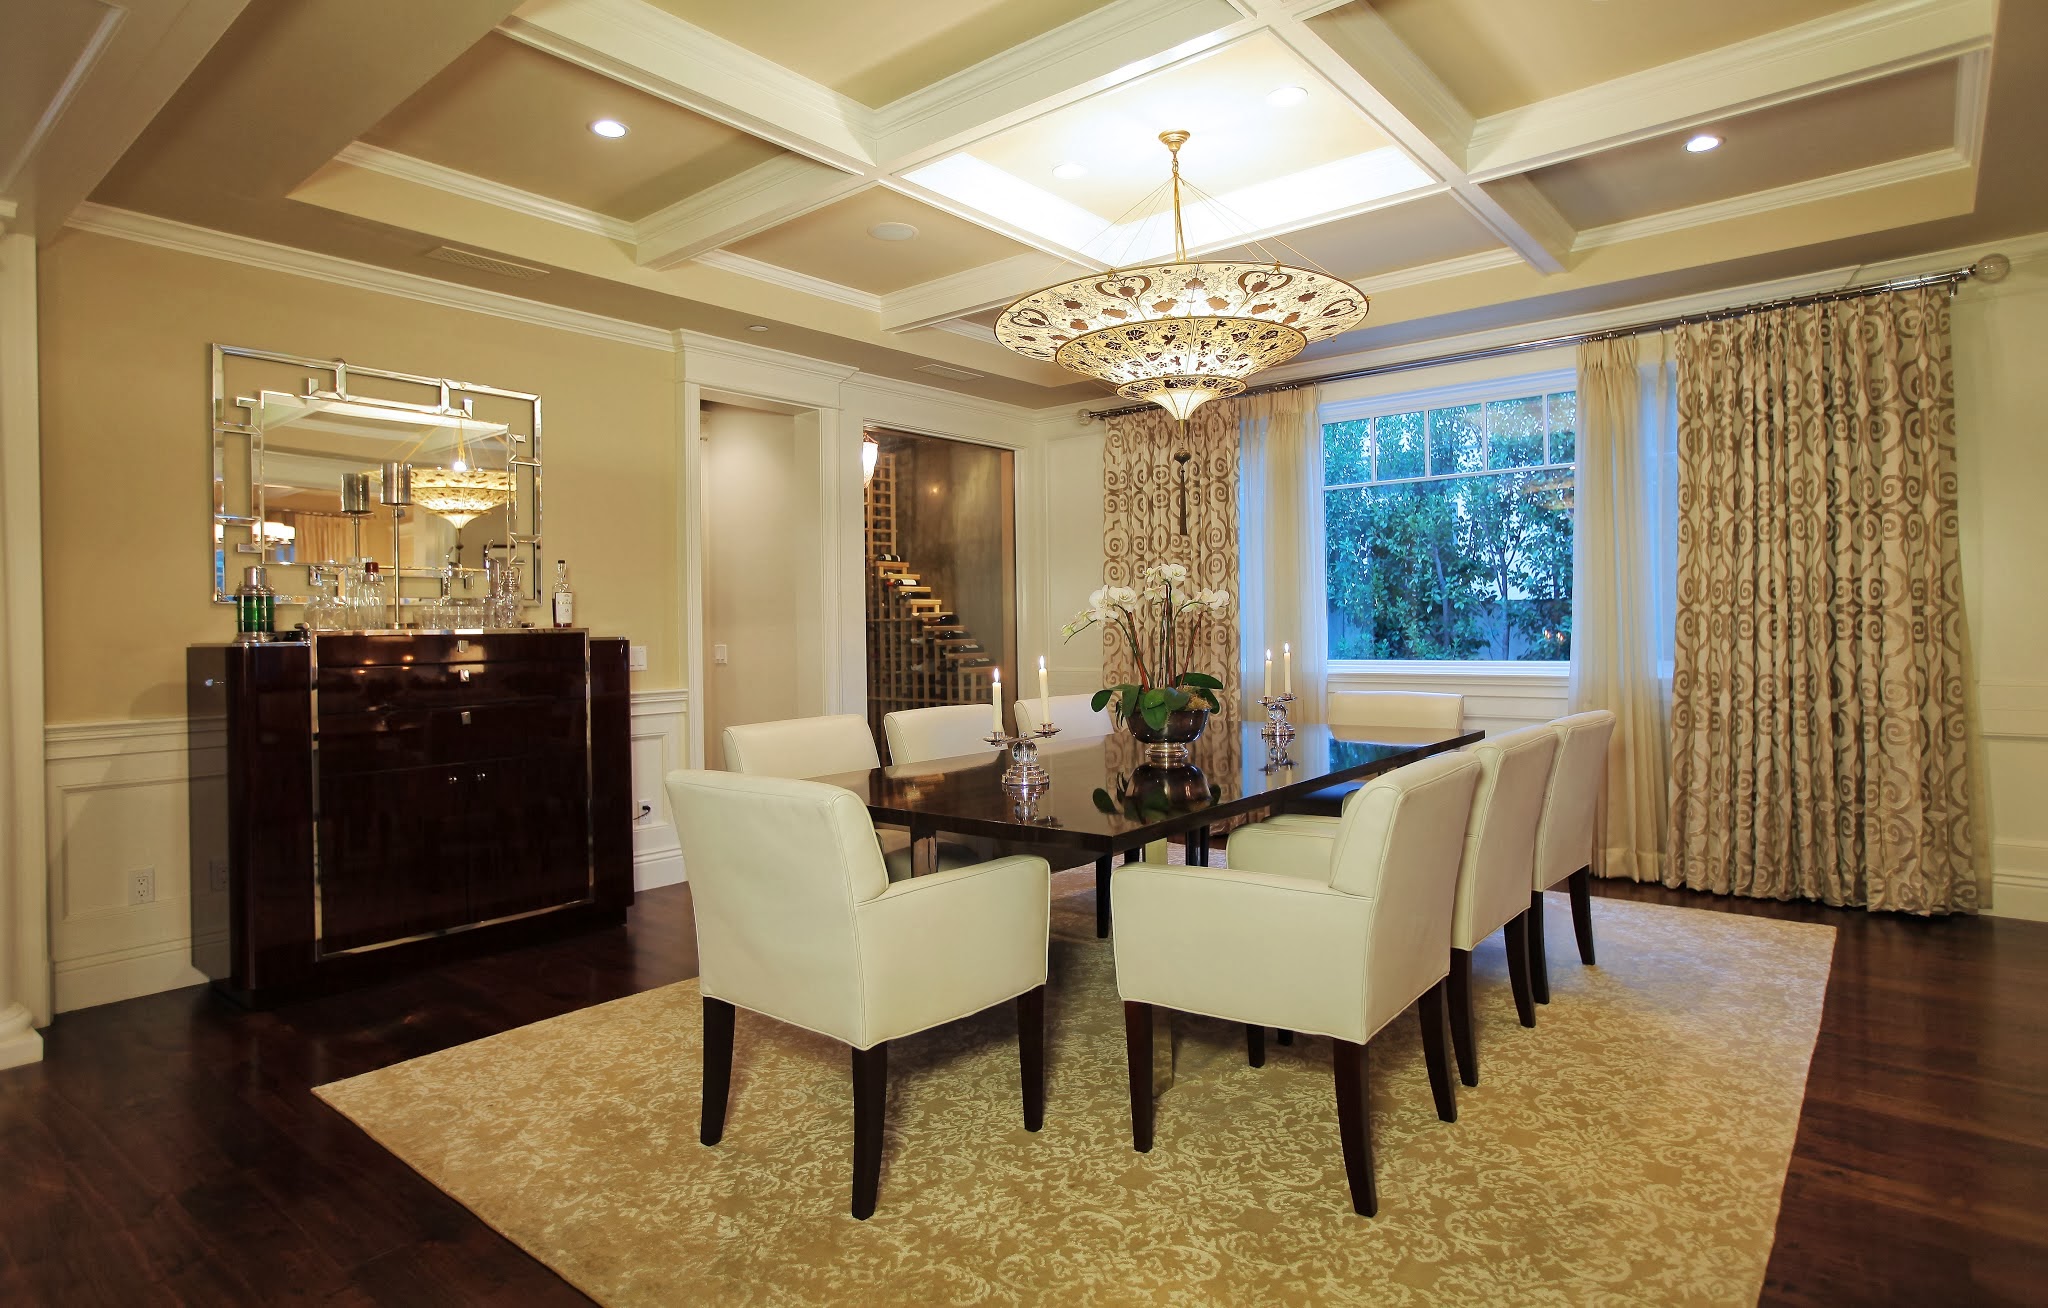 dining room ceiling lamp shades